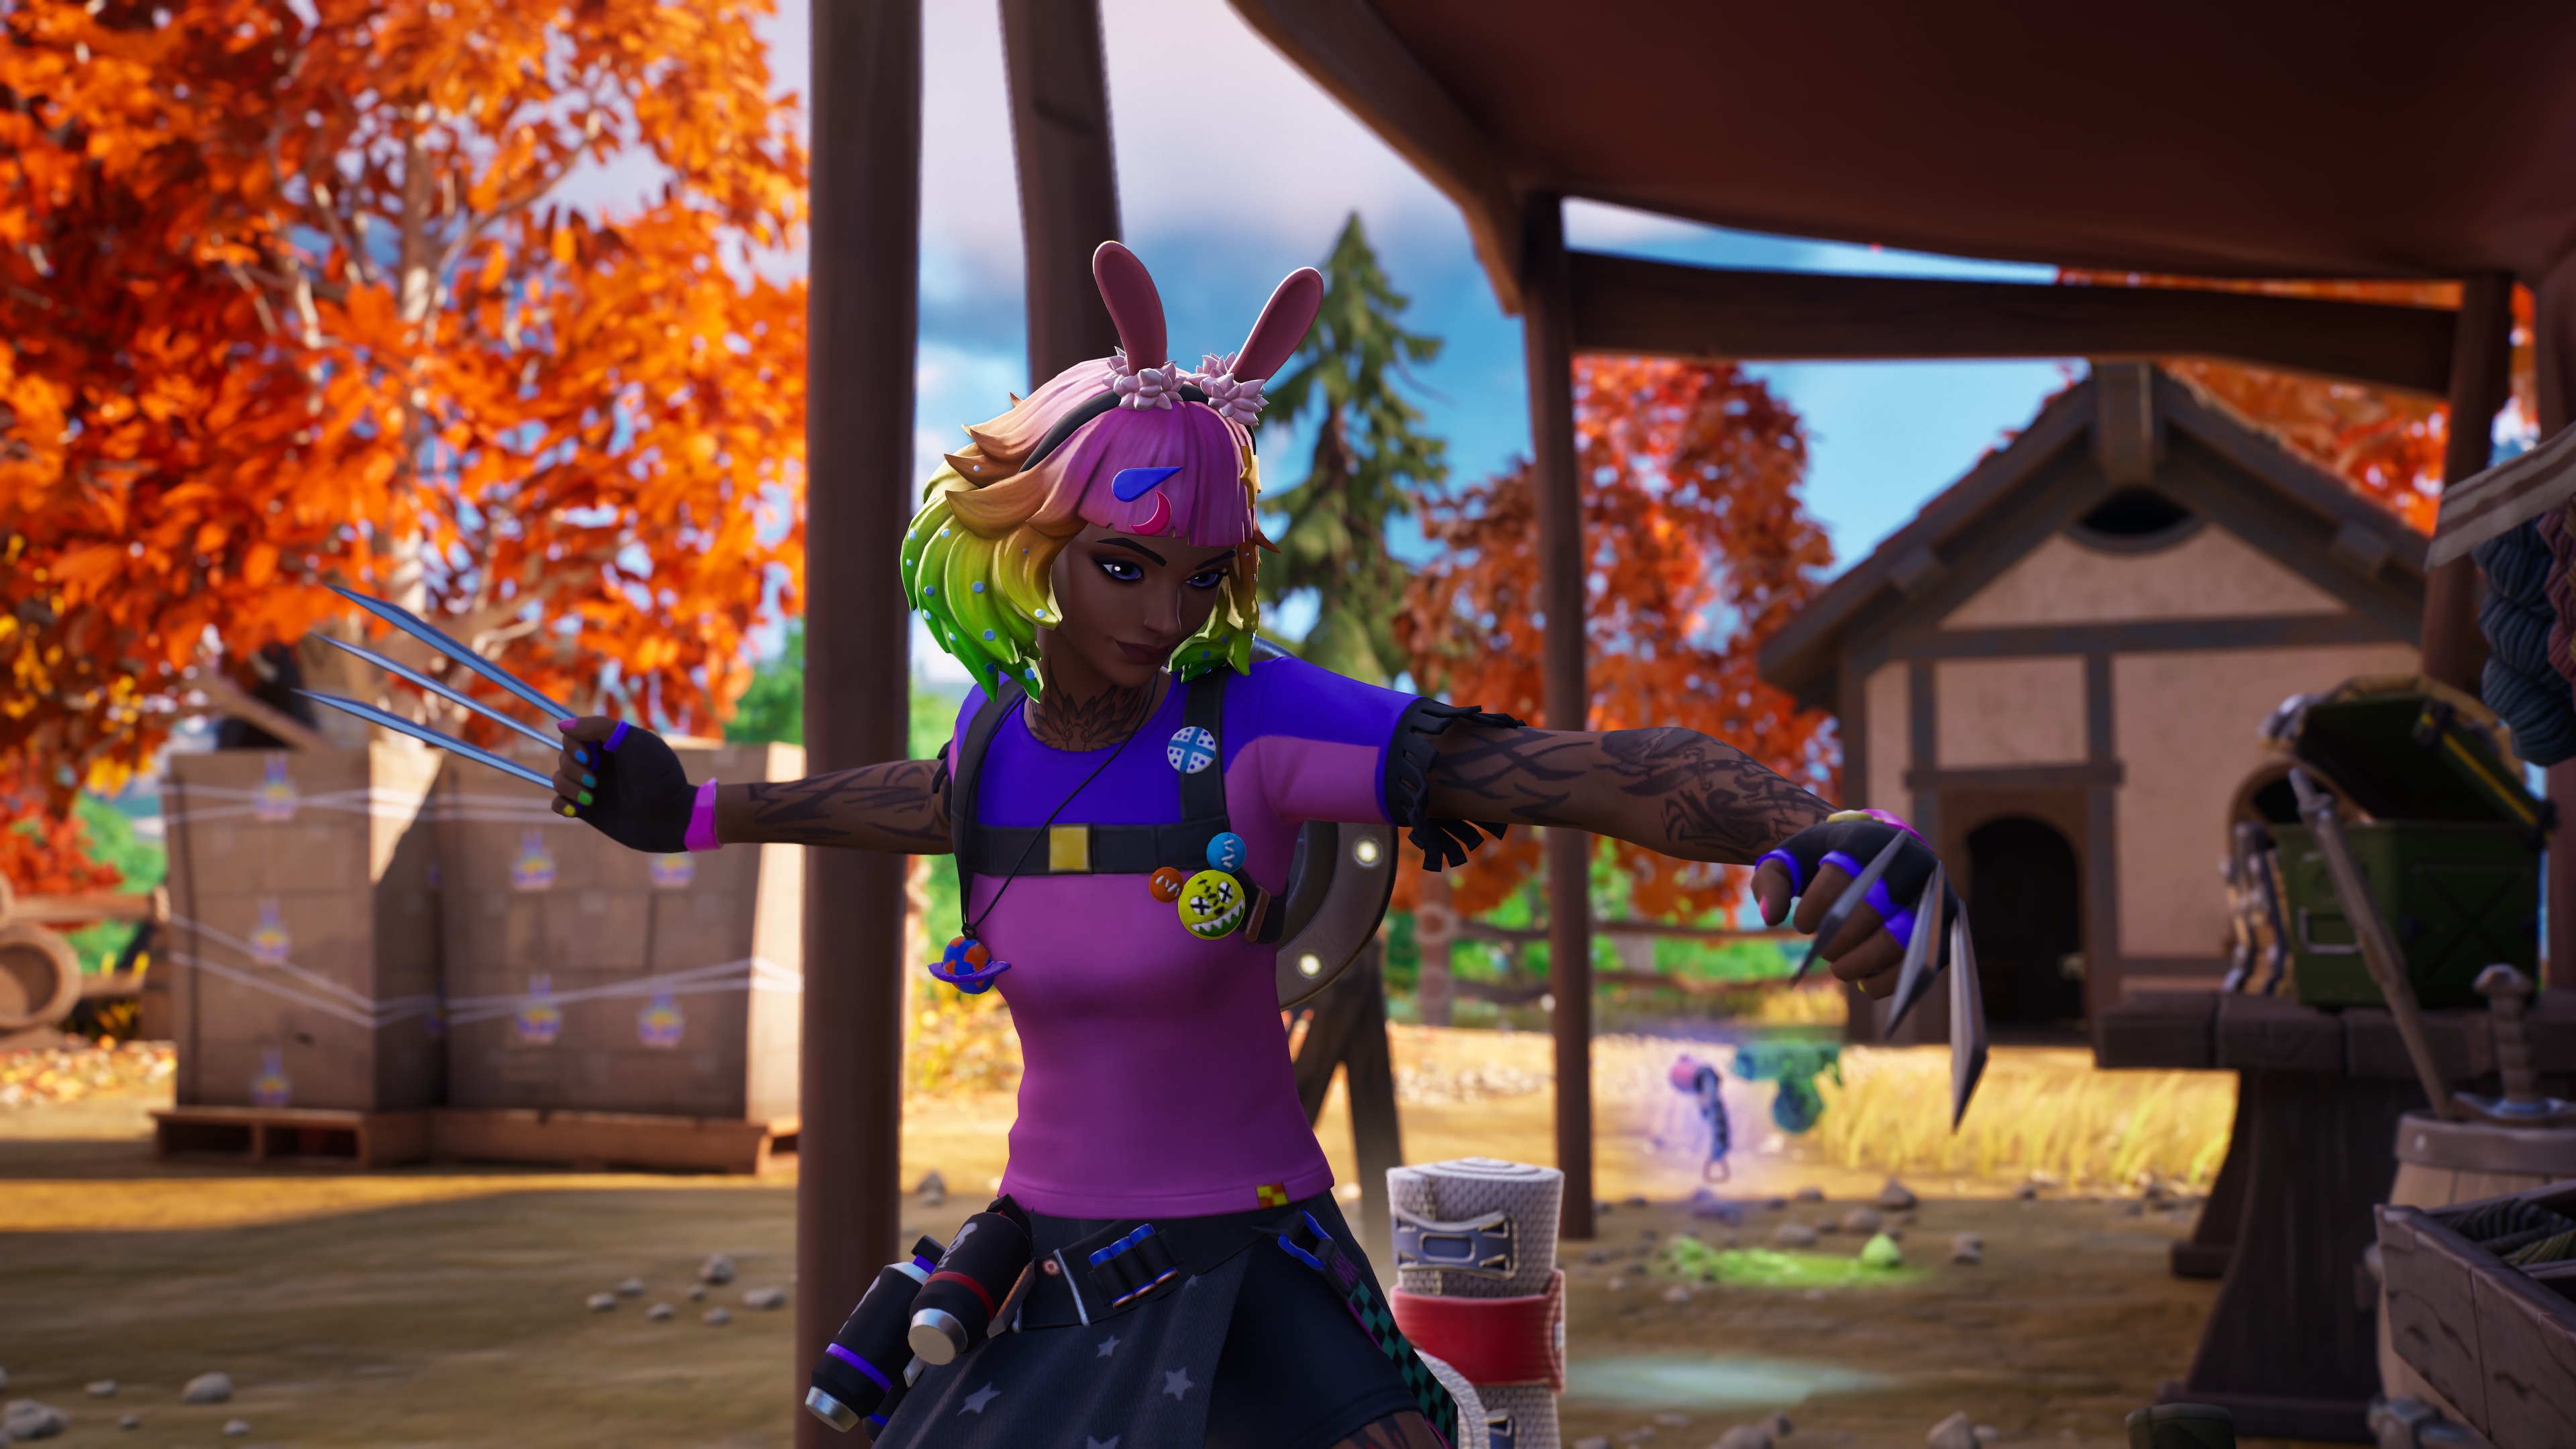 General 3840x2160 Fortnite video games screen shot CGI multi-colored hair gloves fingerless gloves bunny ears weapon tattoo smiling video game characters